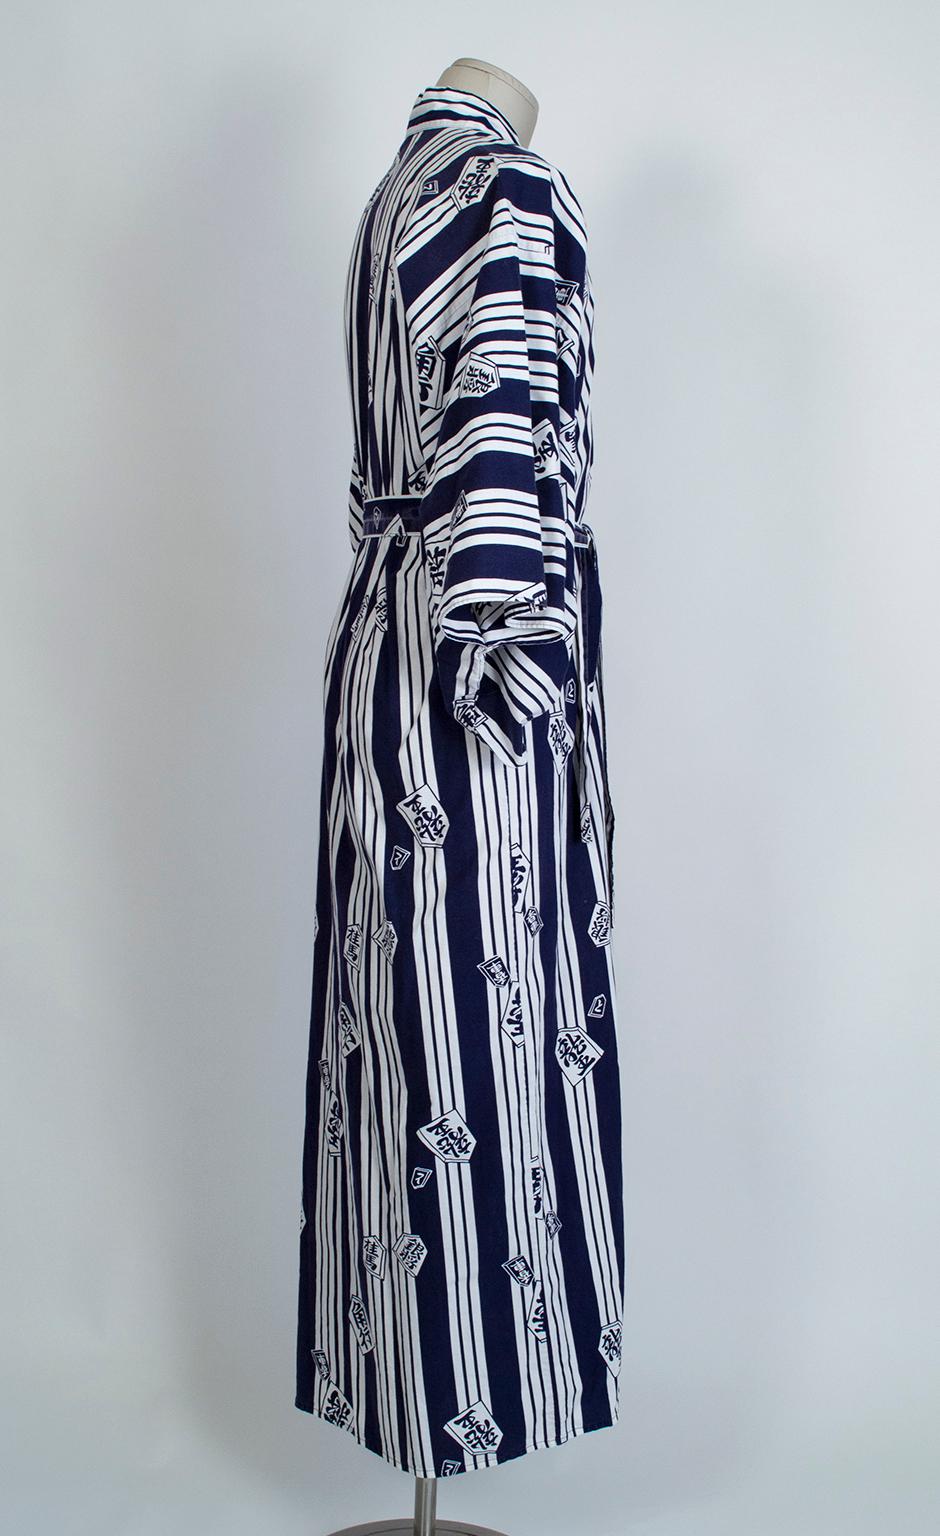 In crisp lightweight cotton, this striking yukata is perfect for lounging around the house, pool and resort. Best of all, it's machine washable so you won't be afraid to wear it often (and look smart doing so!).

Navy and white cotton yukata /